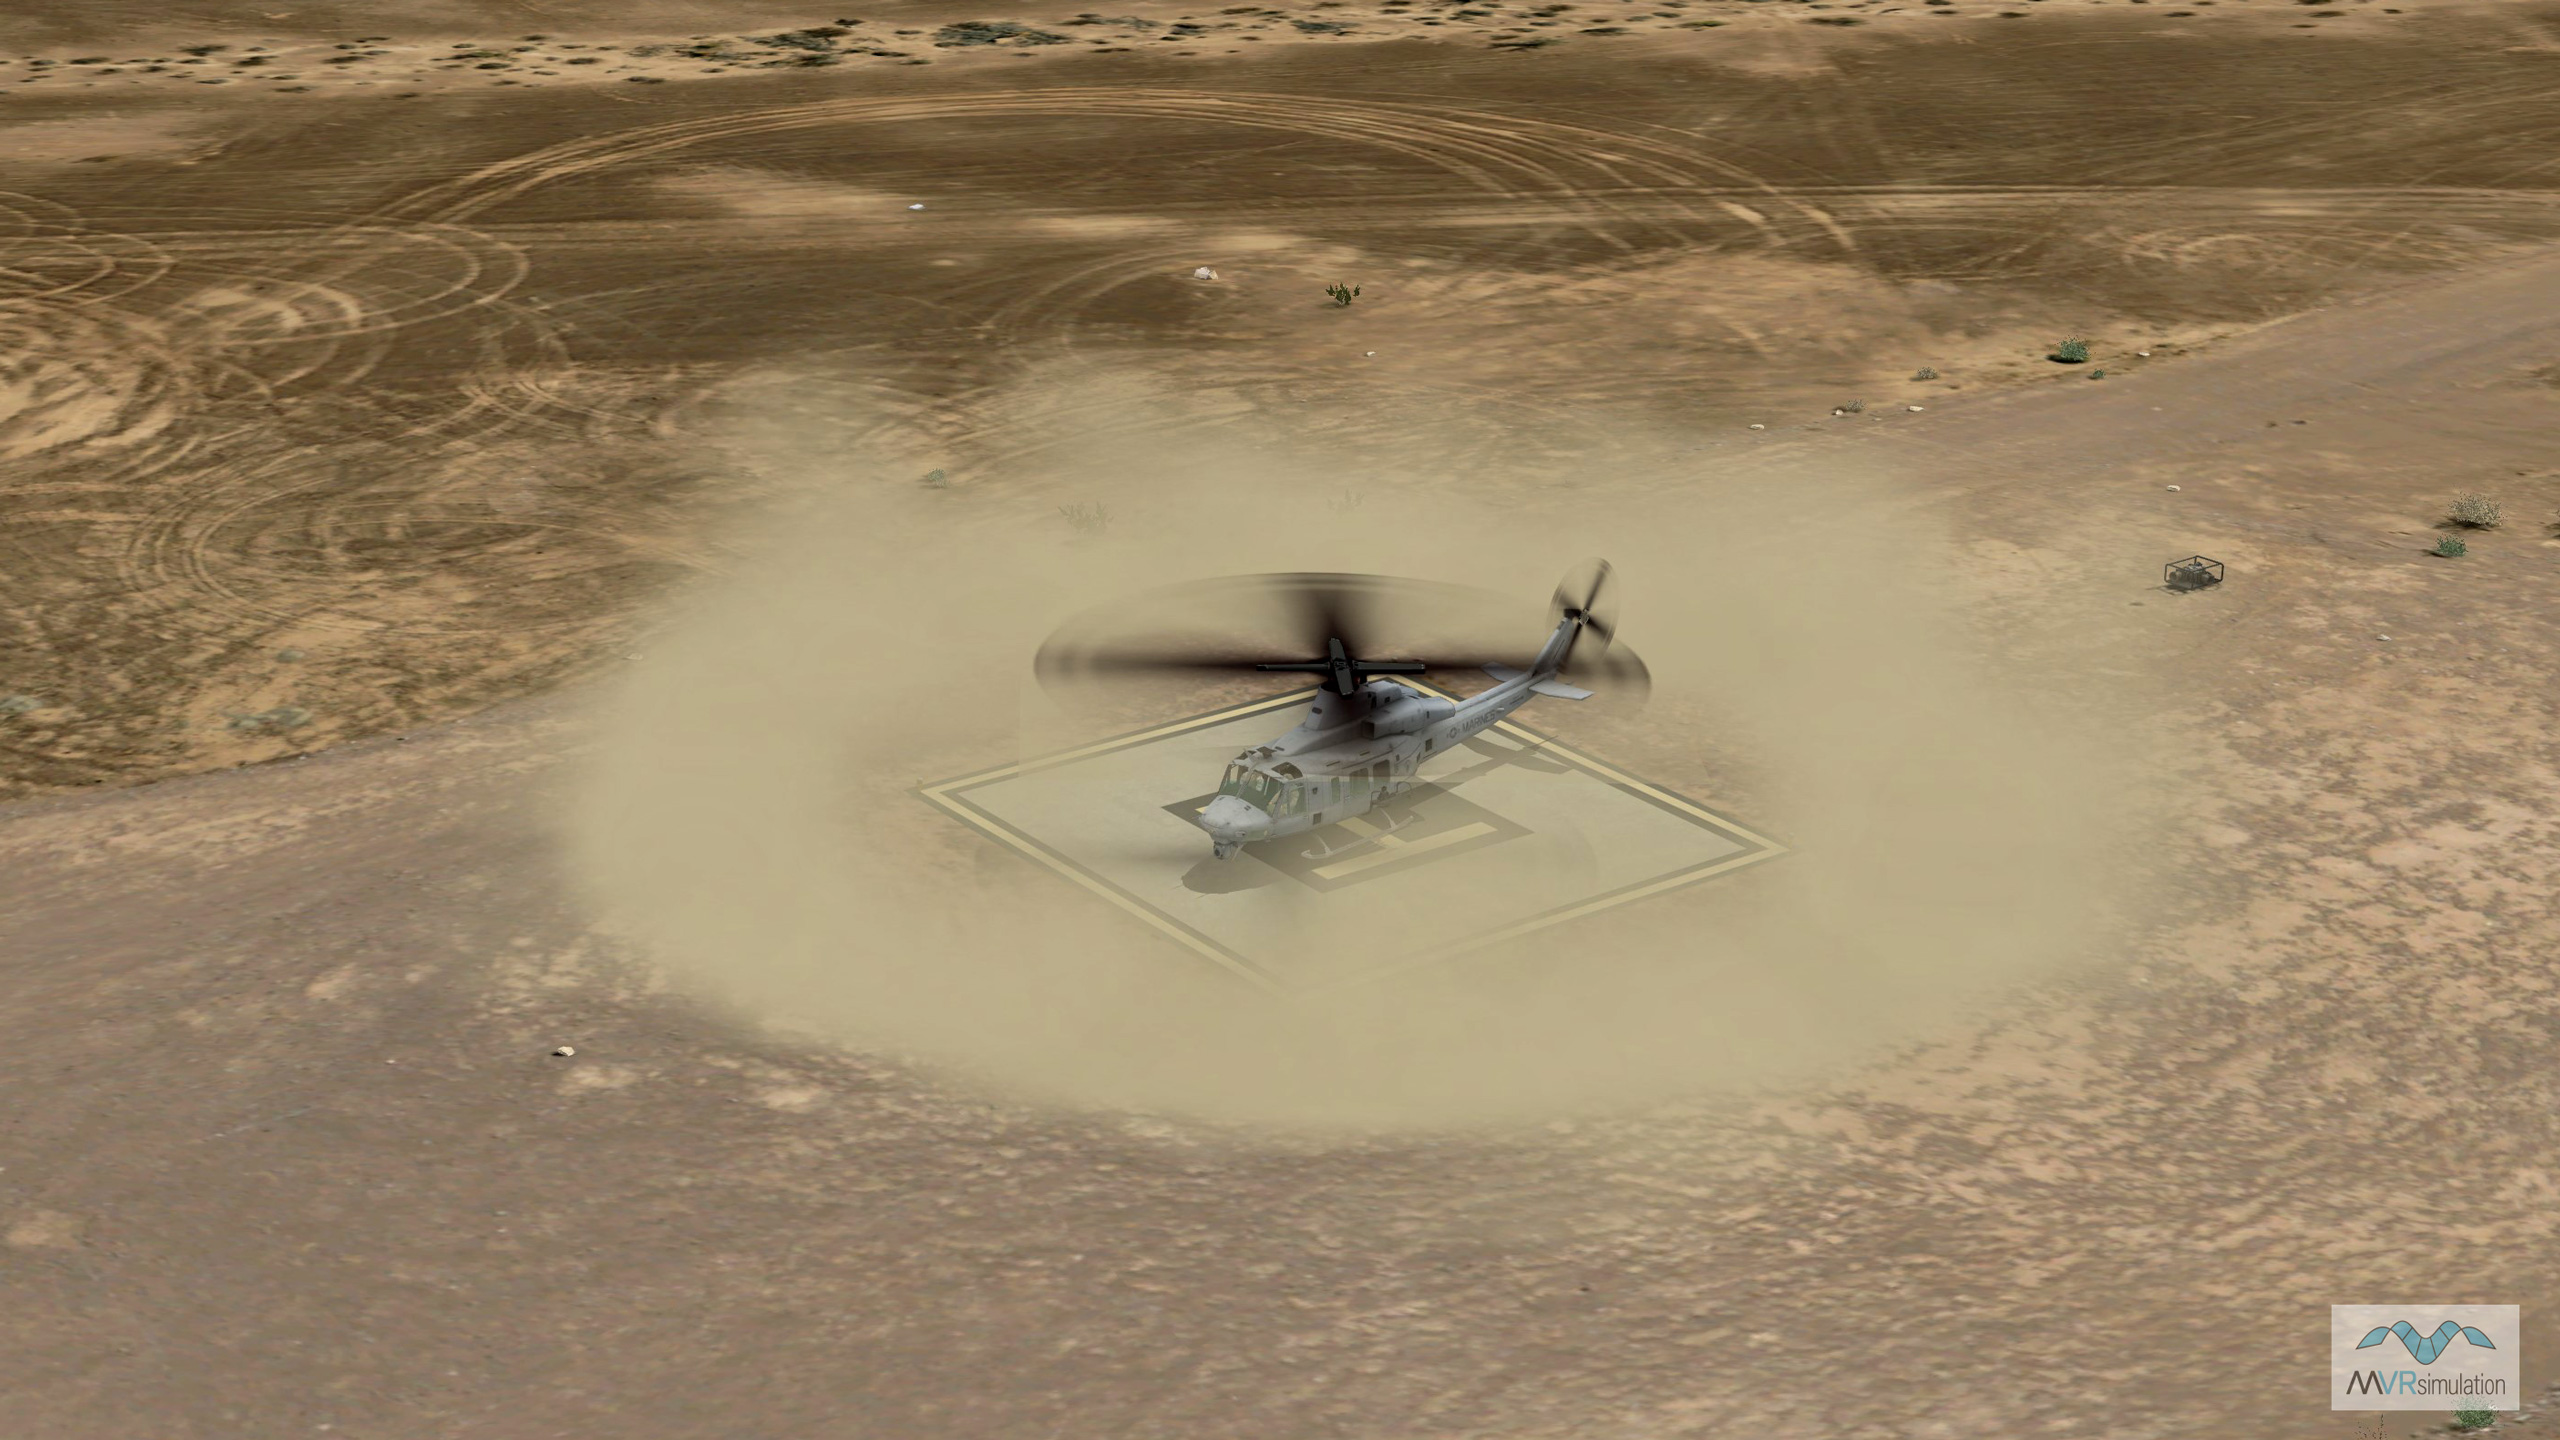 Example of MVRsimulation VRSG's simulated brown-out dust effect. The scene shows a UH-1Y entity model preparing for take-off, with dust generated by particle effects per rotor.